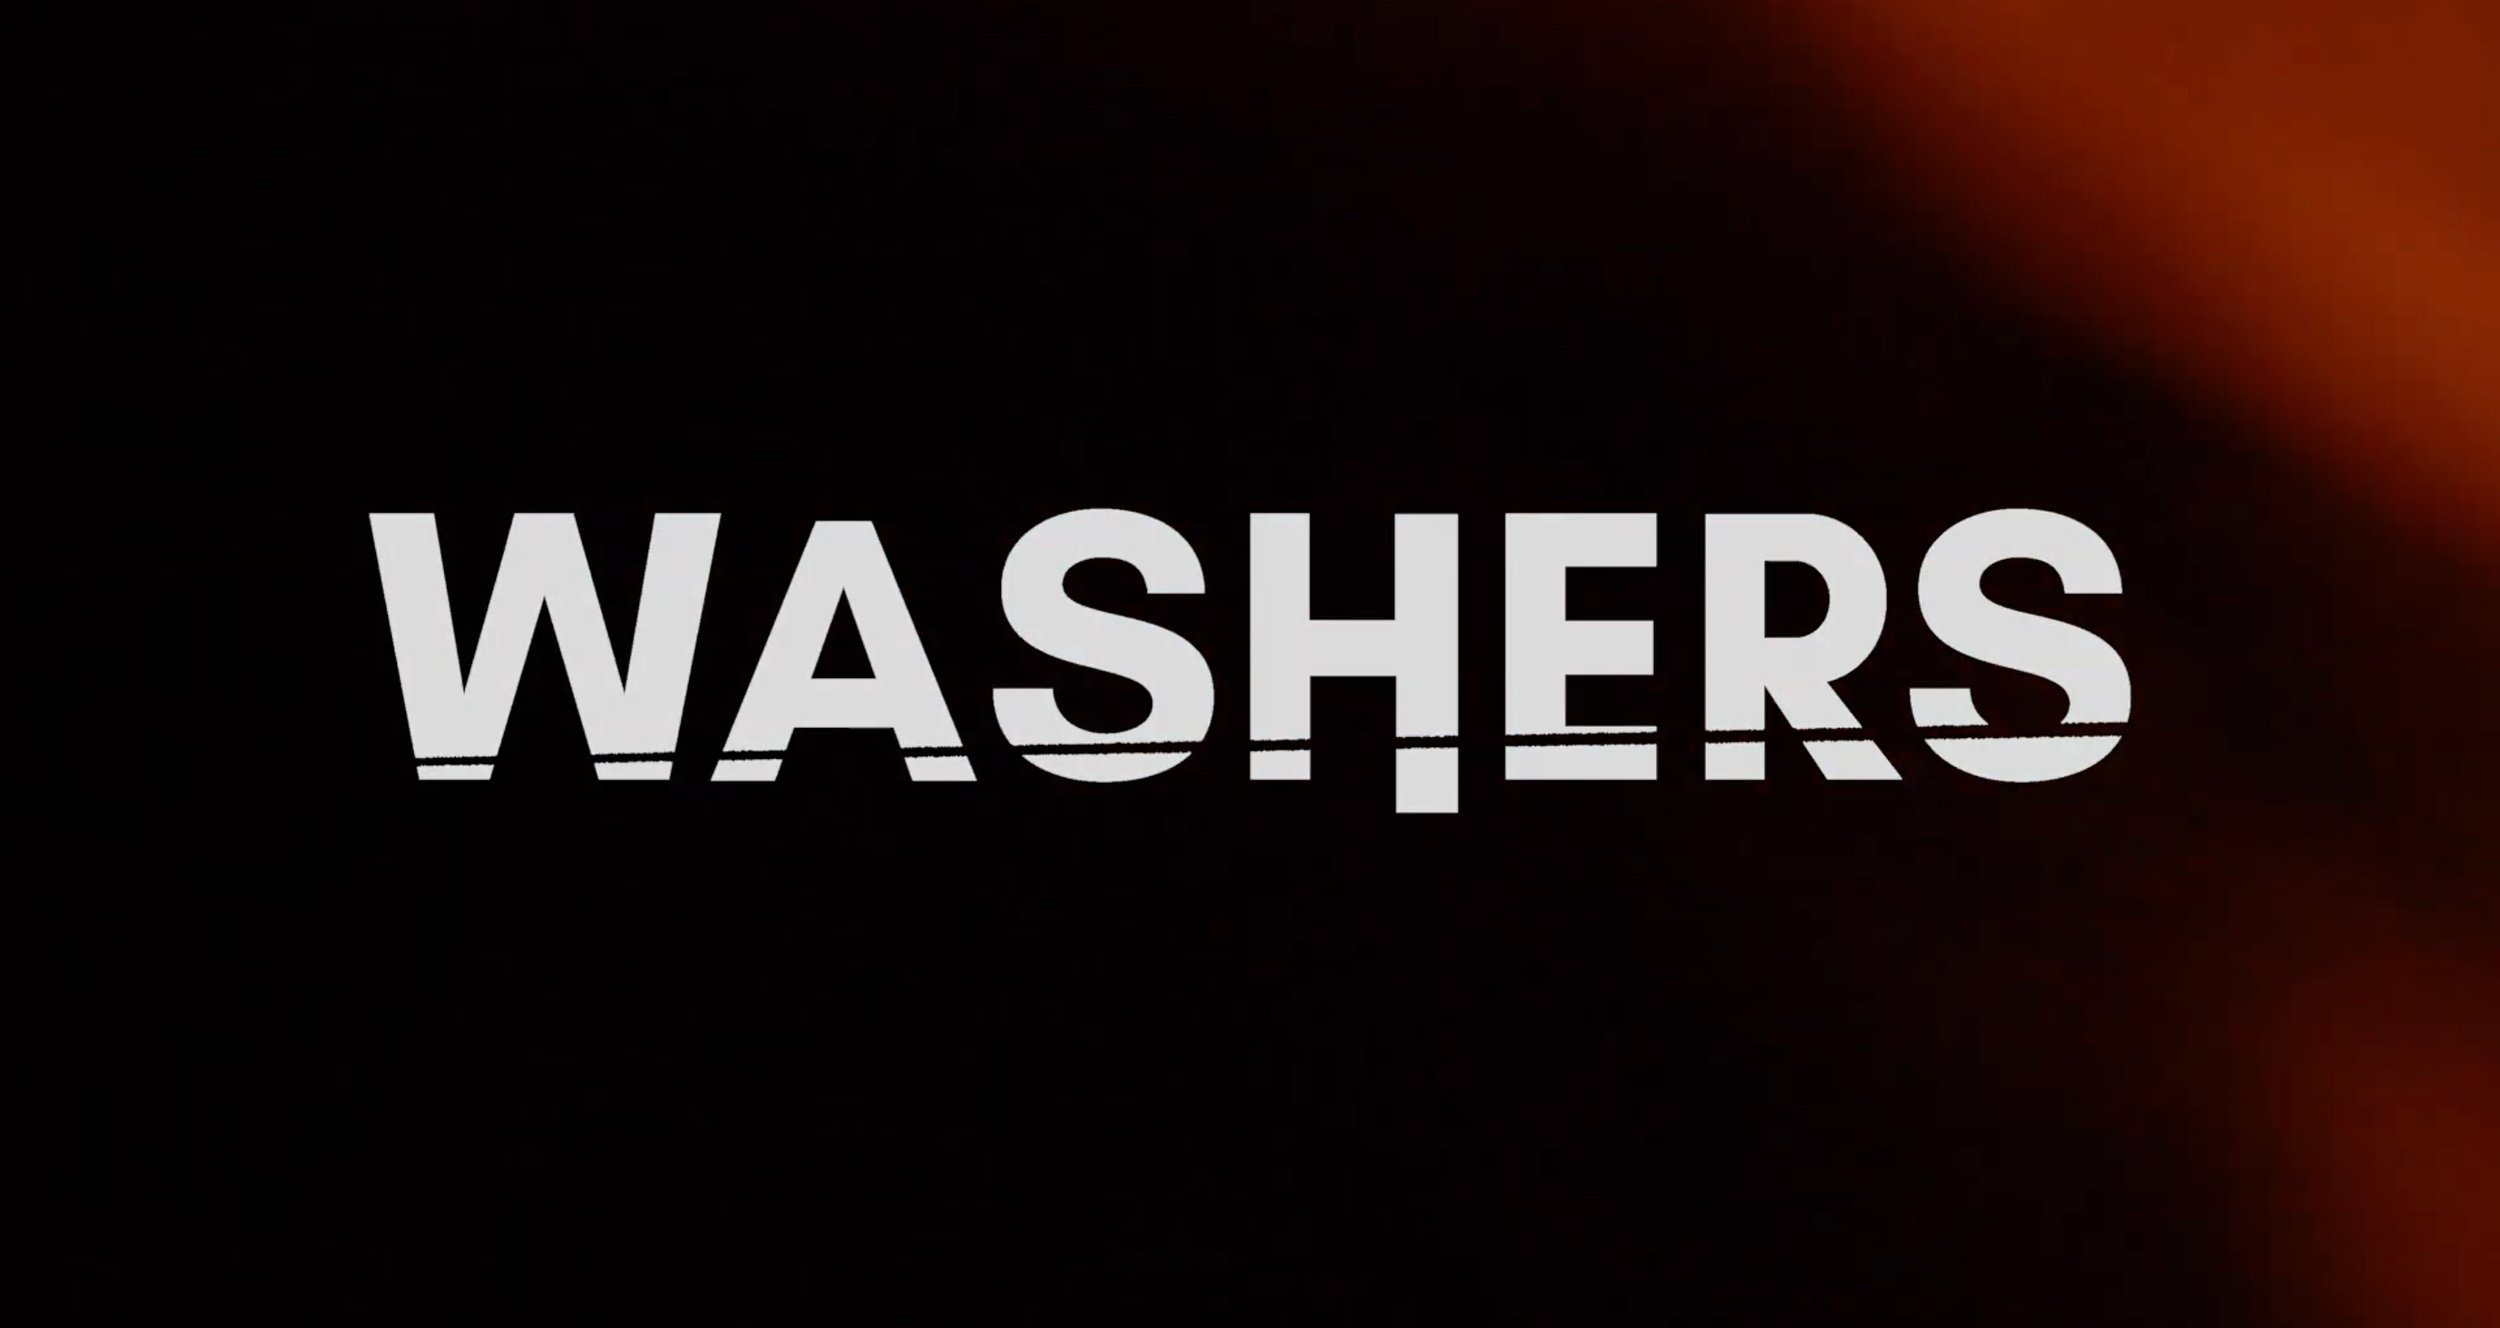 WASHERS-Music-Video-Drown-Marie Catafesta-Vancouver Photographer-Music Videography-Album Release-Post Rock Band.jpg